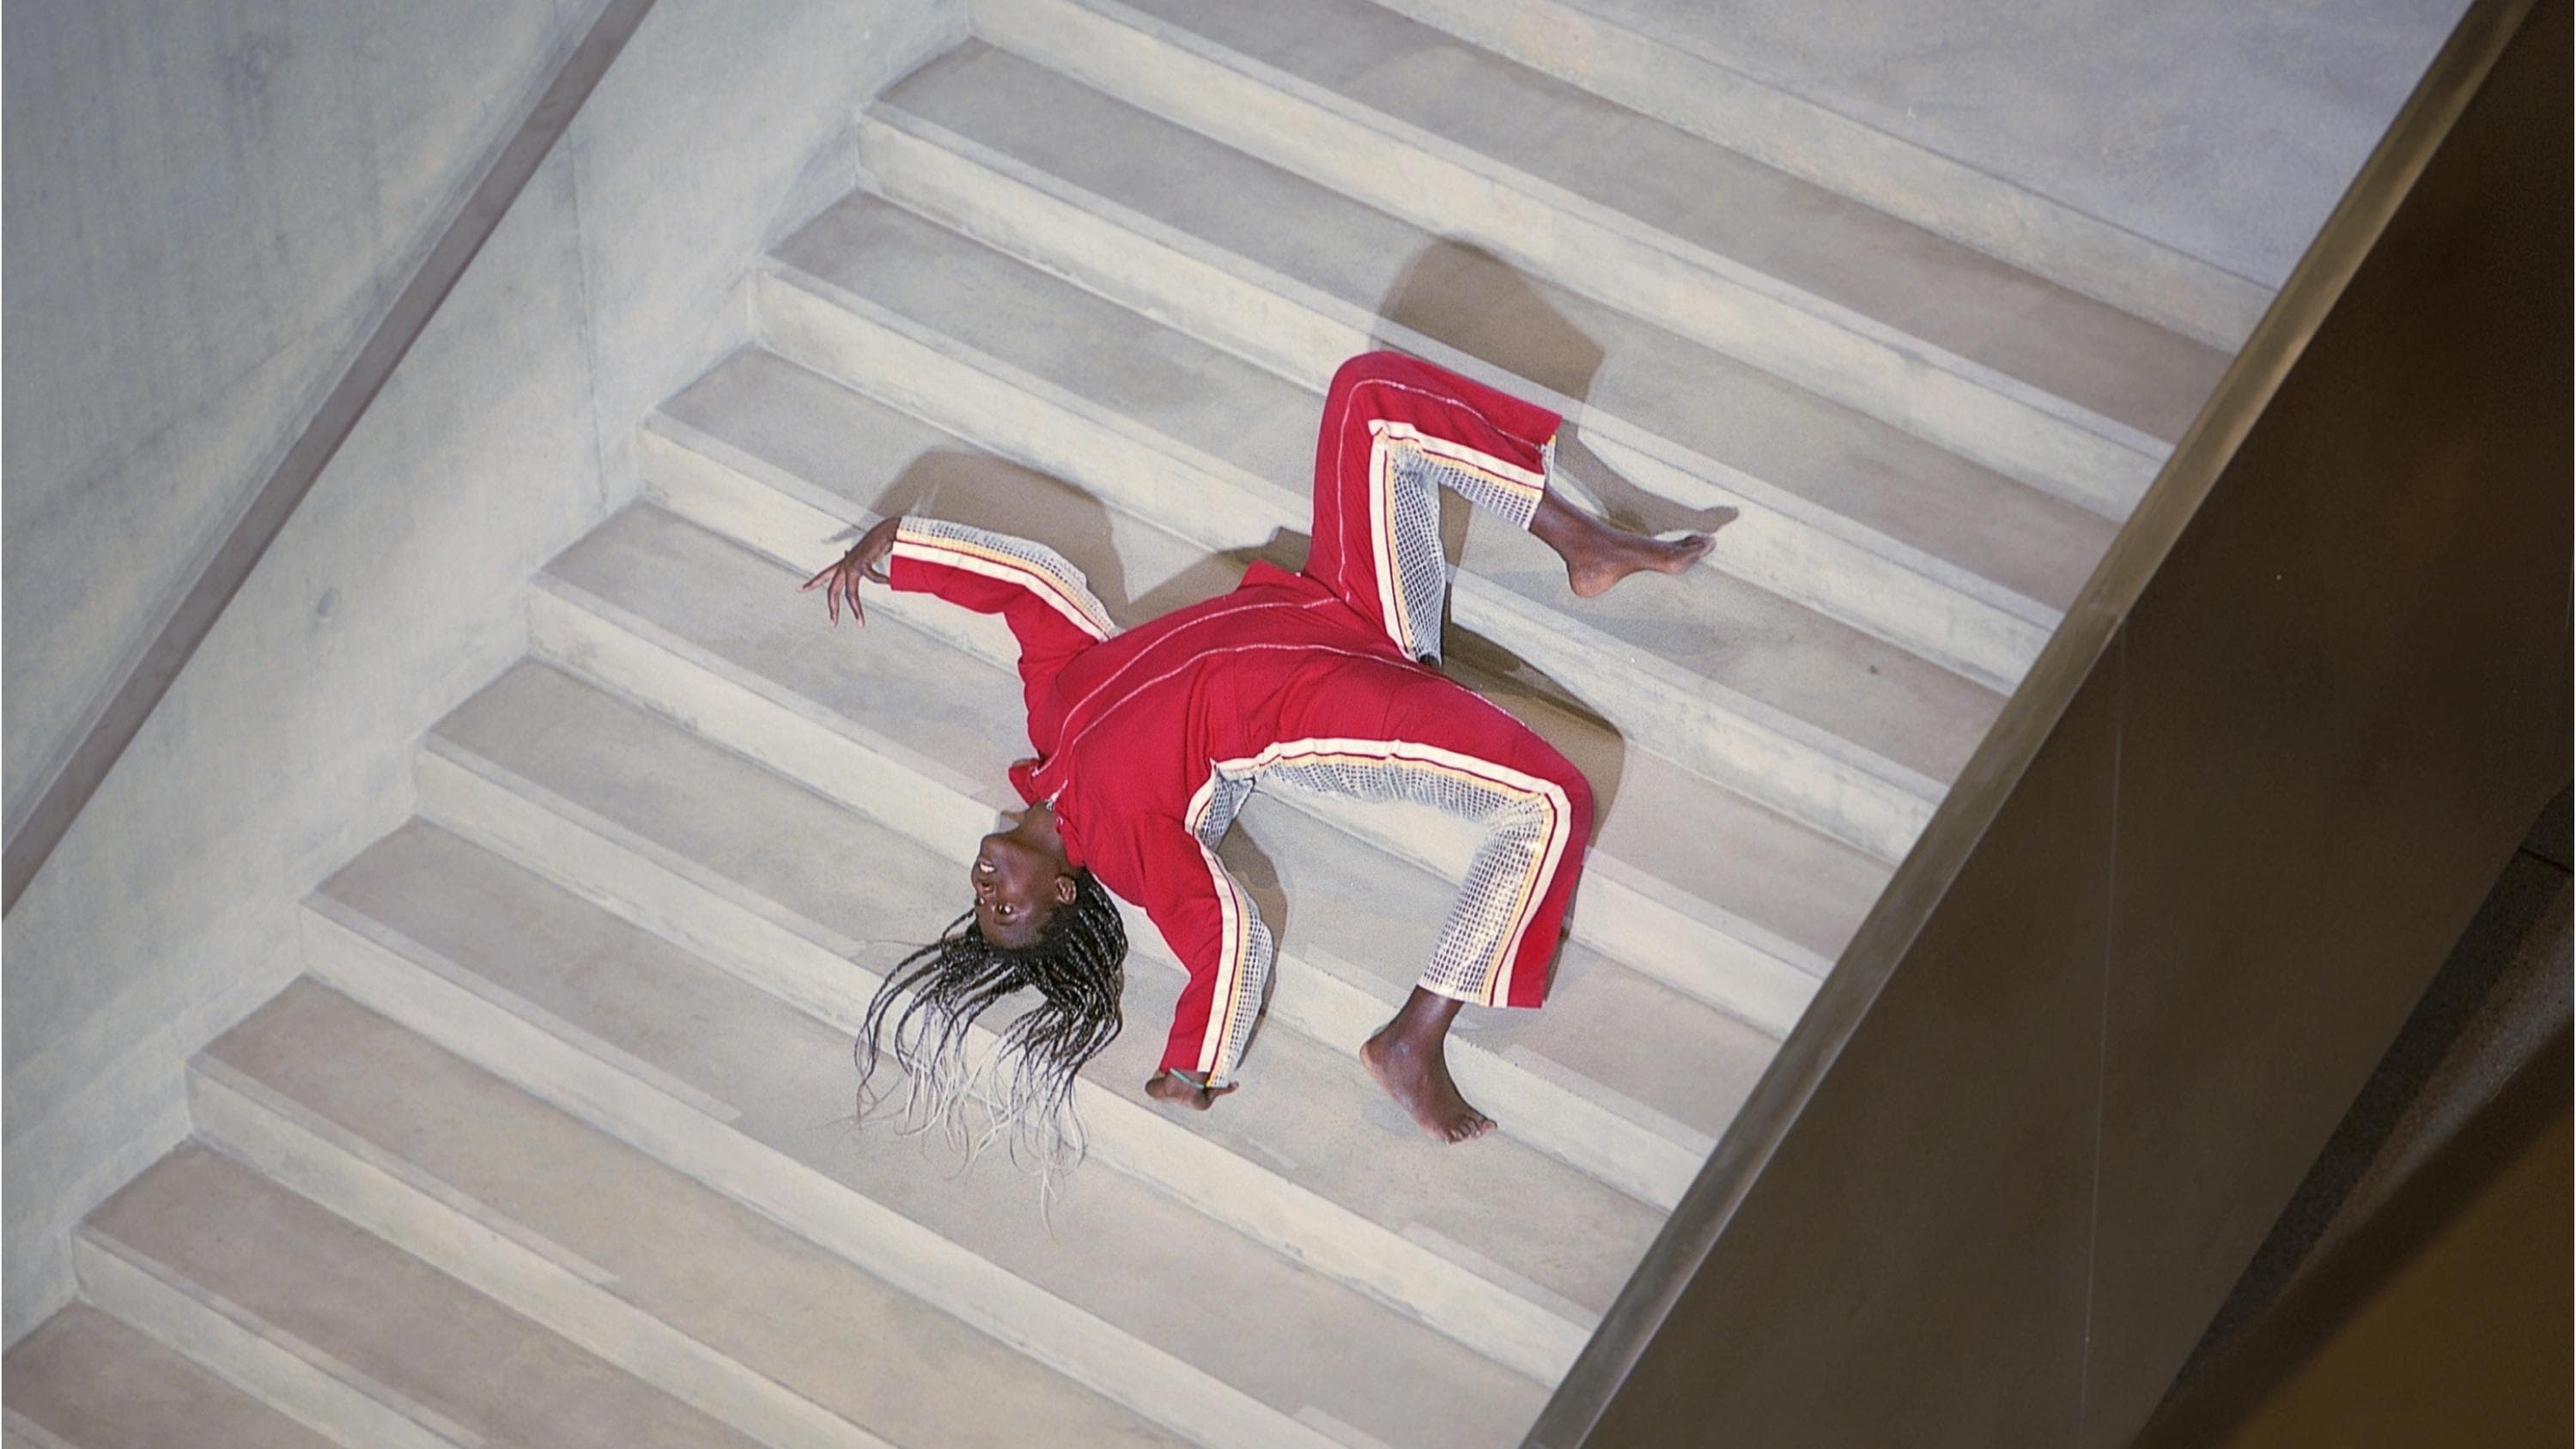 Performer upside down in a staircase